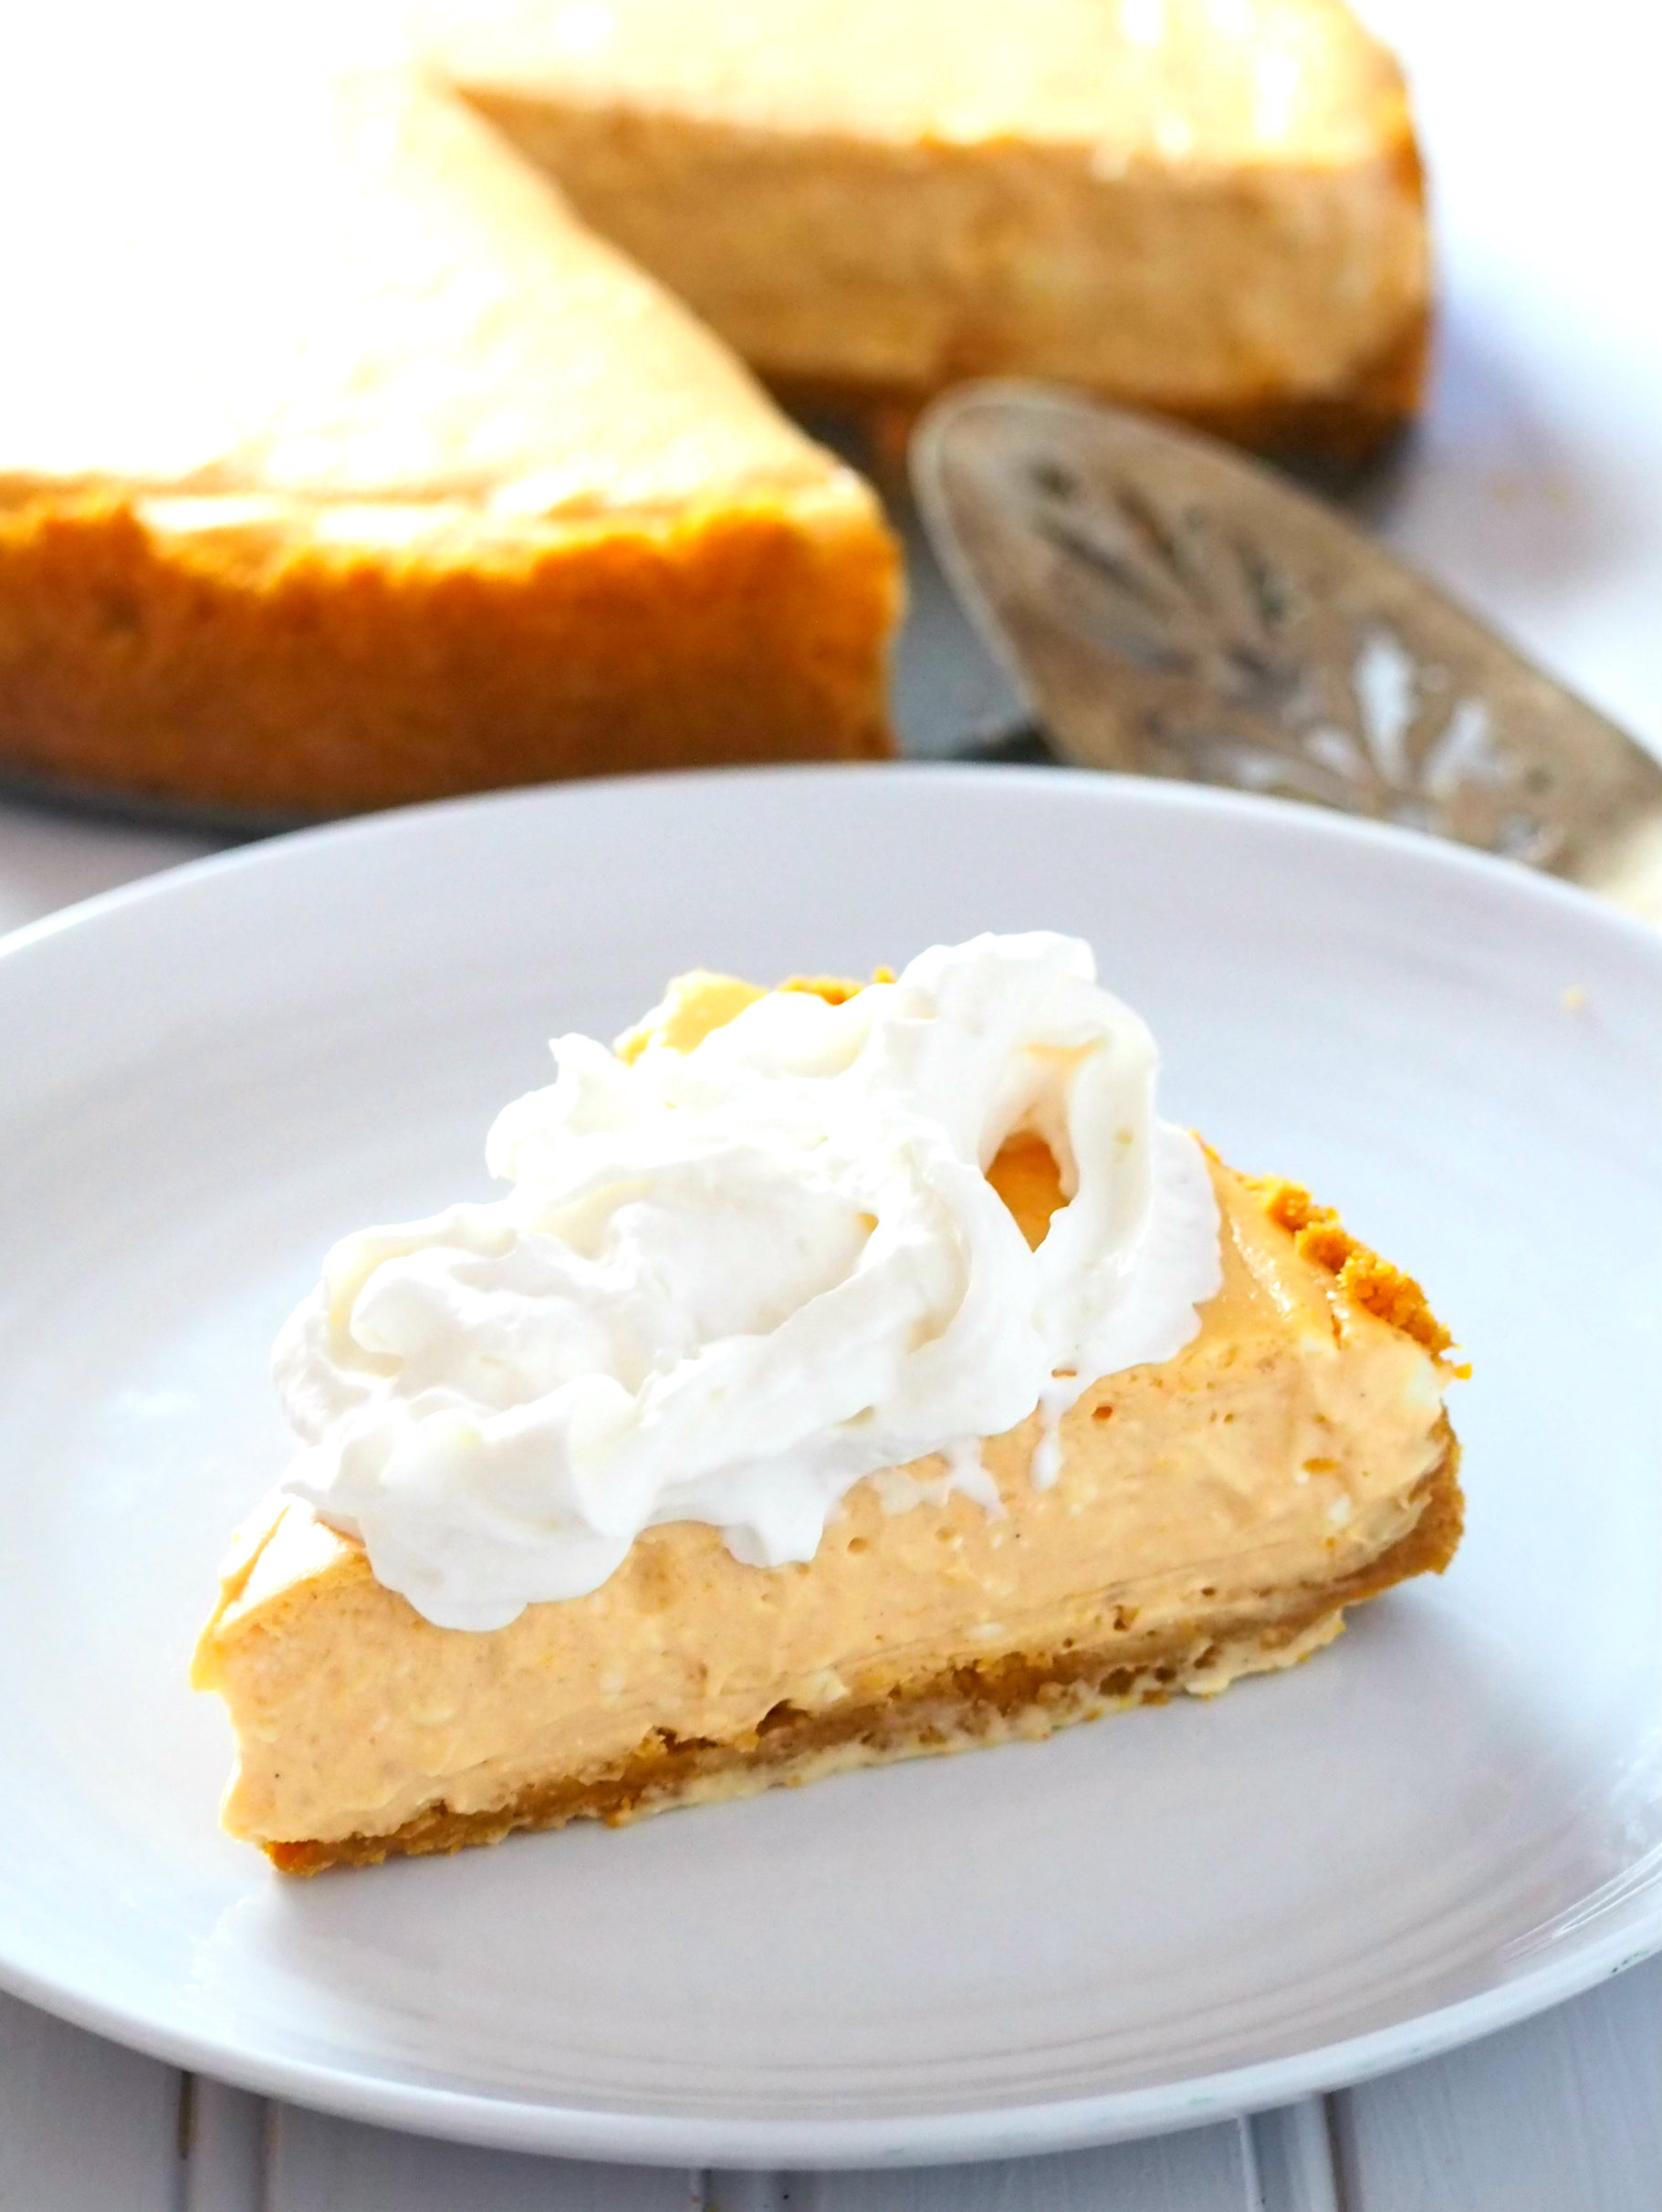 This Pumpkin Cheesecake is a simple recipe that produces a lightly indulgent cheesecake. It has just the right amount of pumpkin flavor that blends beautifully with the rich cream cheese.